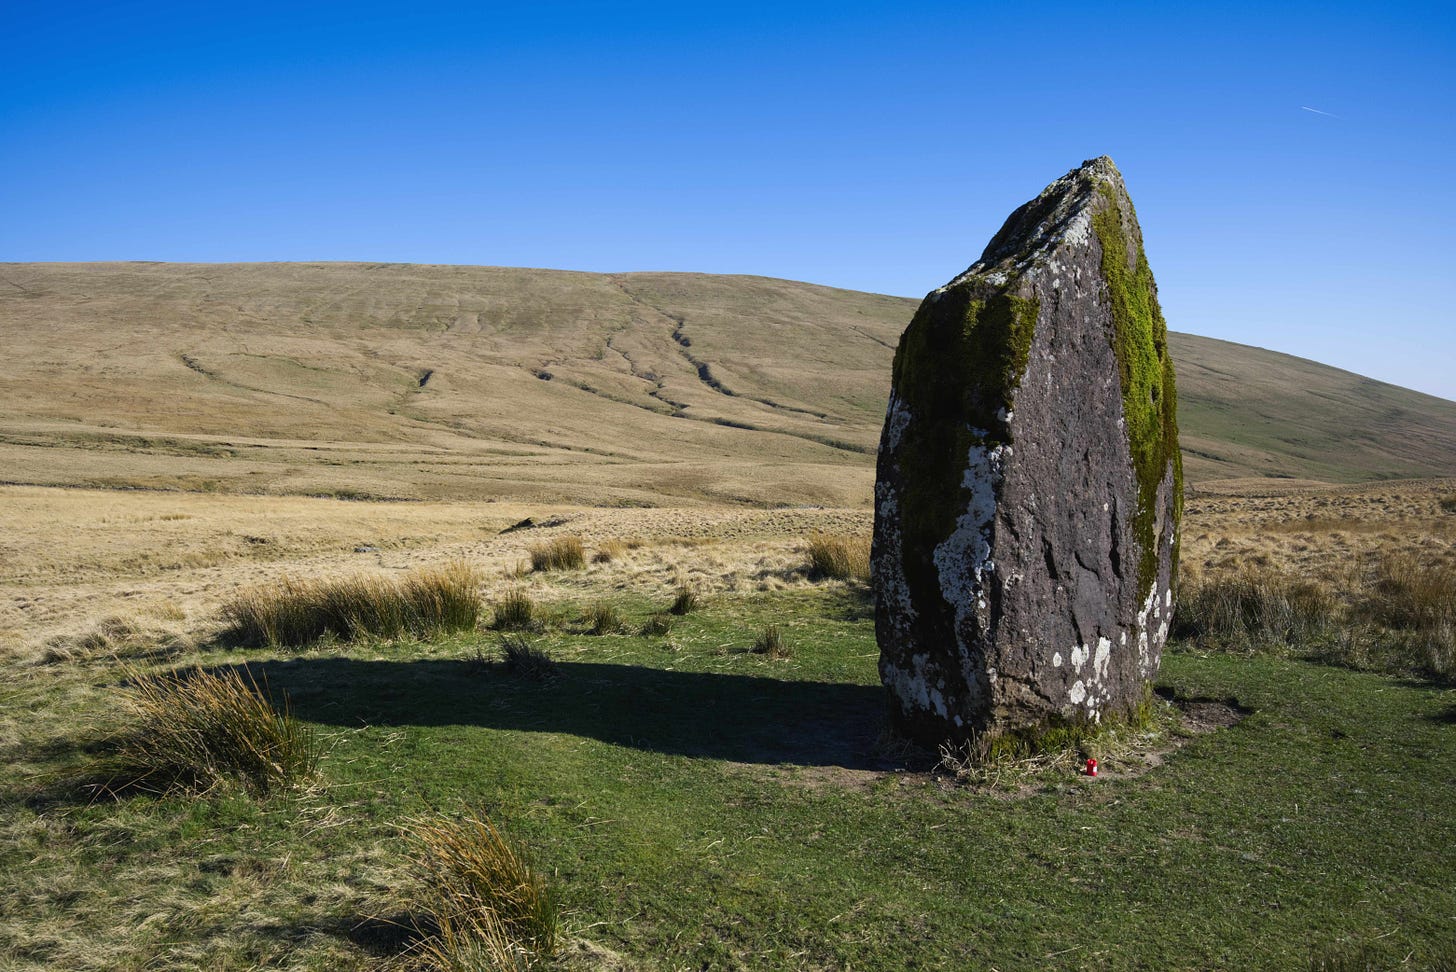 Maen Ilia, a tear drop shaped hunk of stone sits in front of a smooth moorland hillside, sloping down to the right. The moorland is marked with what seem likely to be small meandering streams draining downwards. There is a small red candle offering at the base of the menhir, which is surrounded by a circle of green grass before golden moorgrass fills the landscape. The tall reeds look windswept. There is a bright green mossy patch on the upper face of Maen Ilia. 